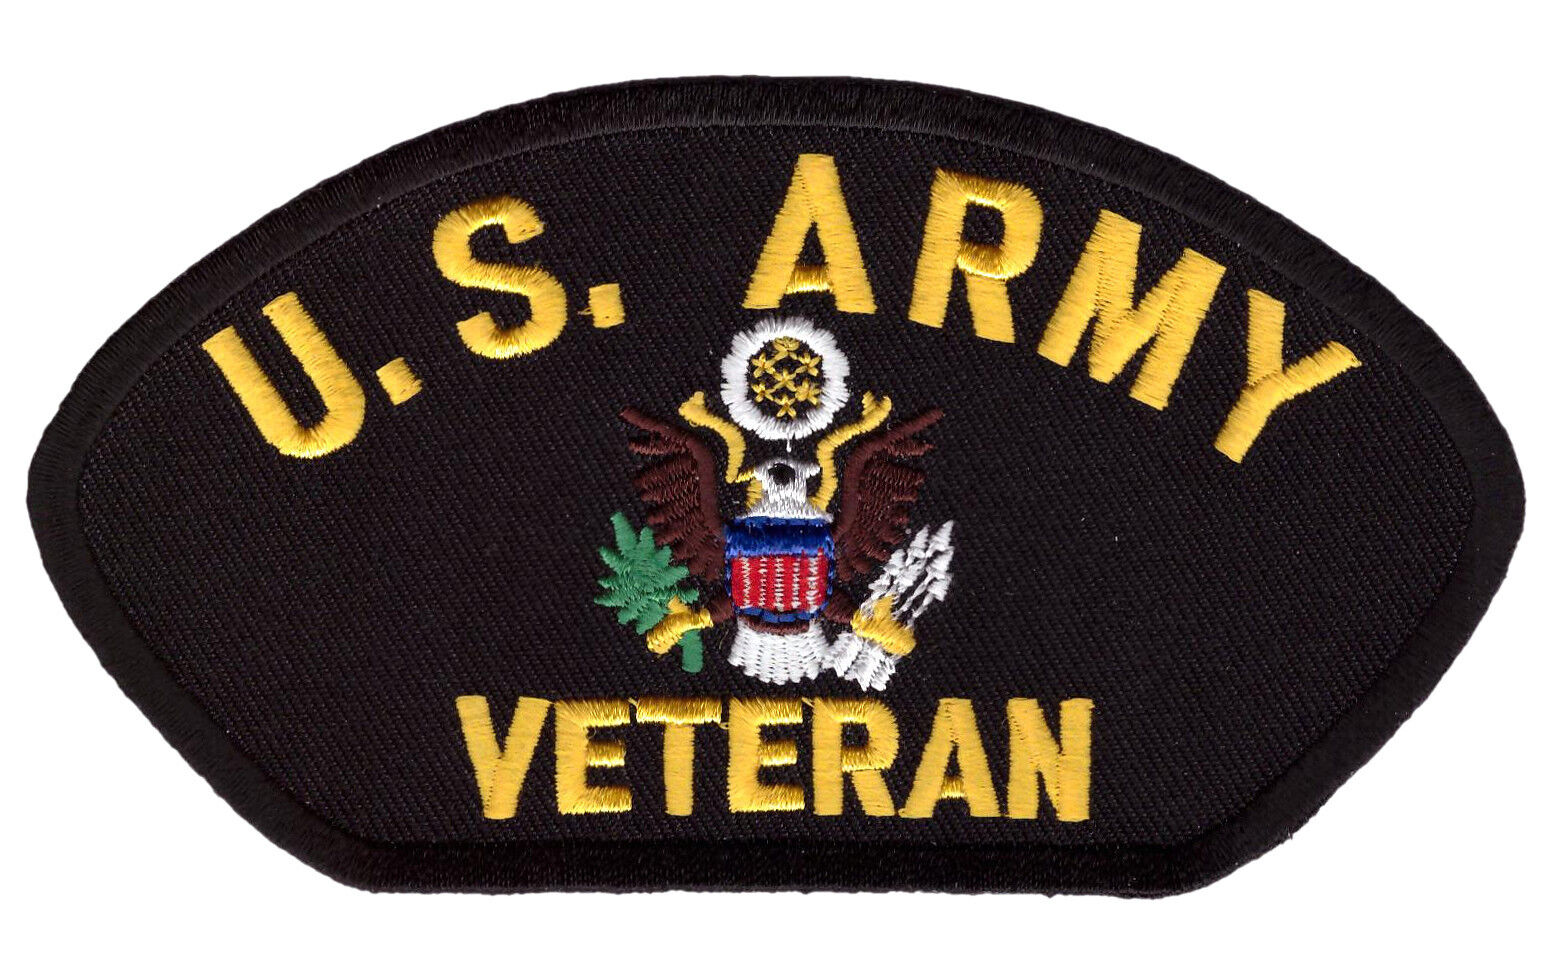 US Army Veteran  EMBROIDERED 5 inch IRON ON MILITARY PATCH 